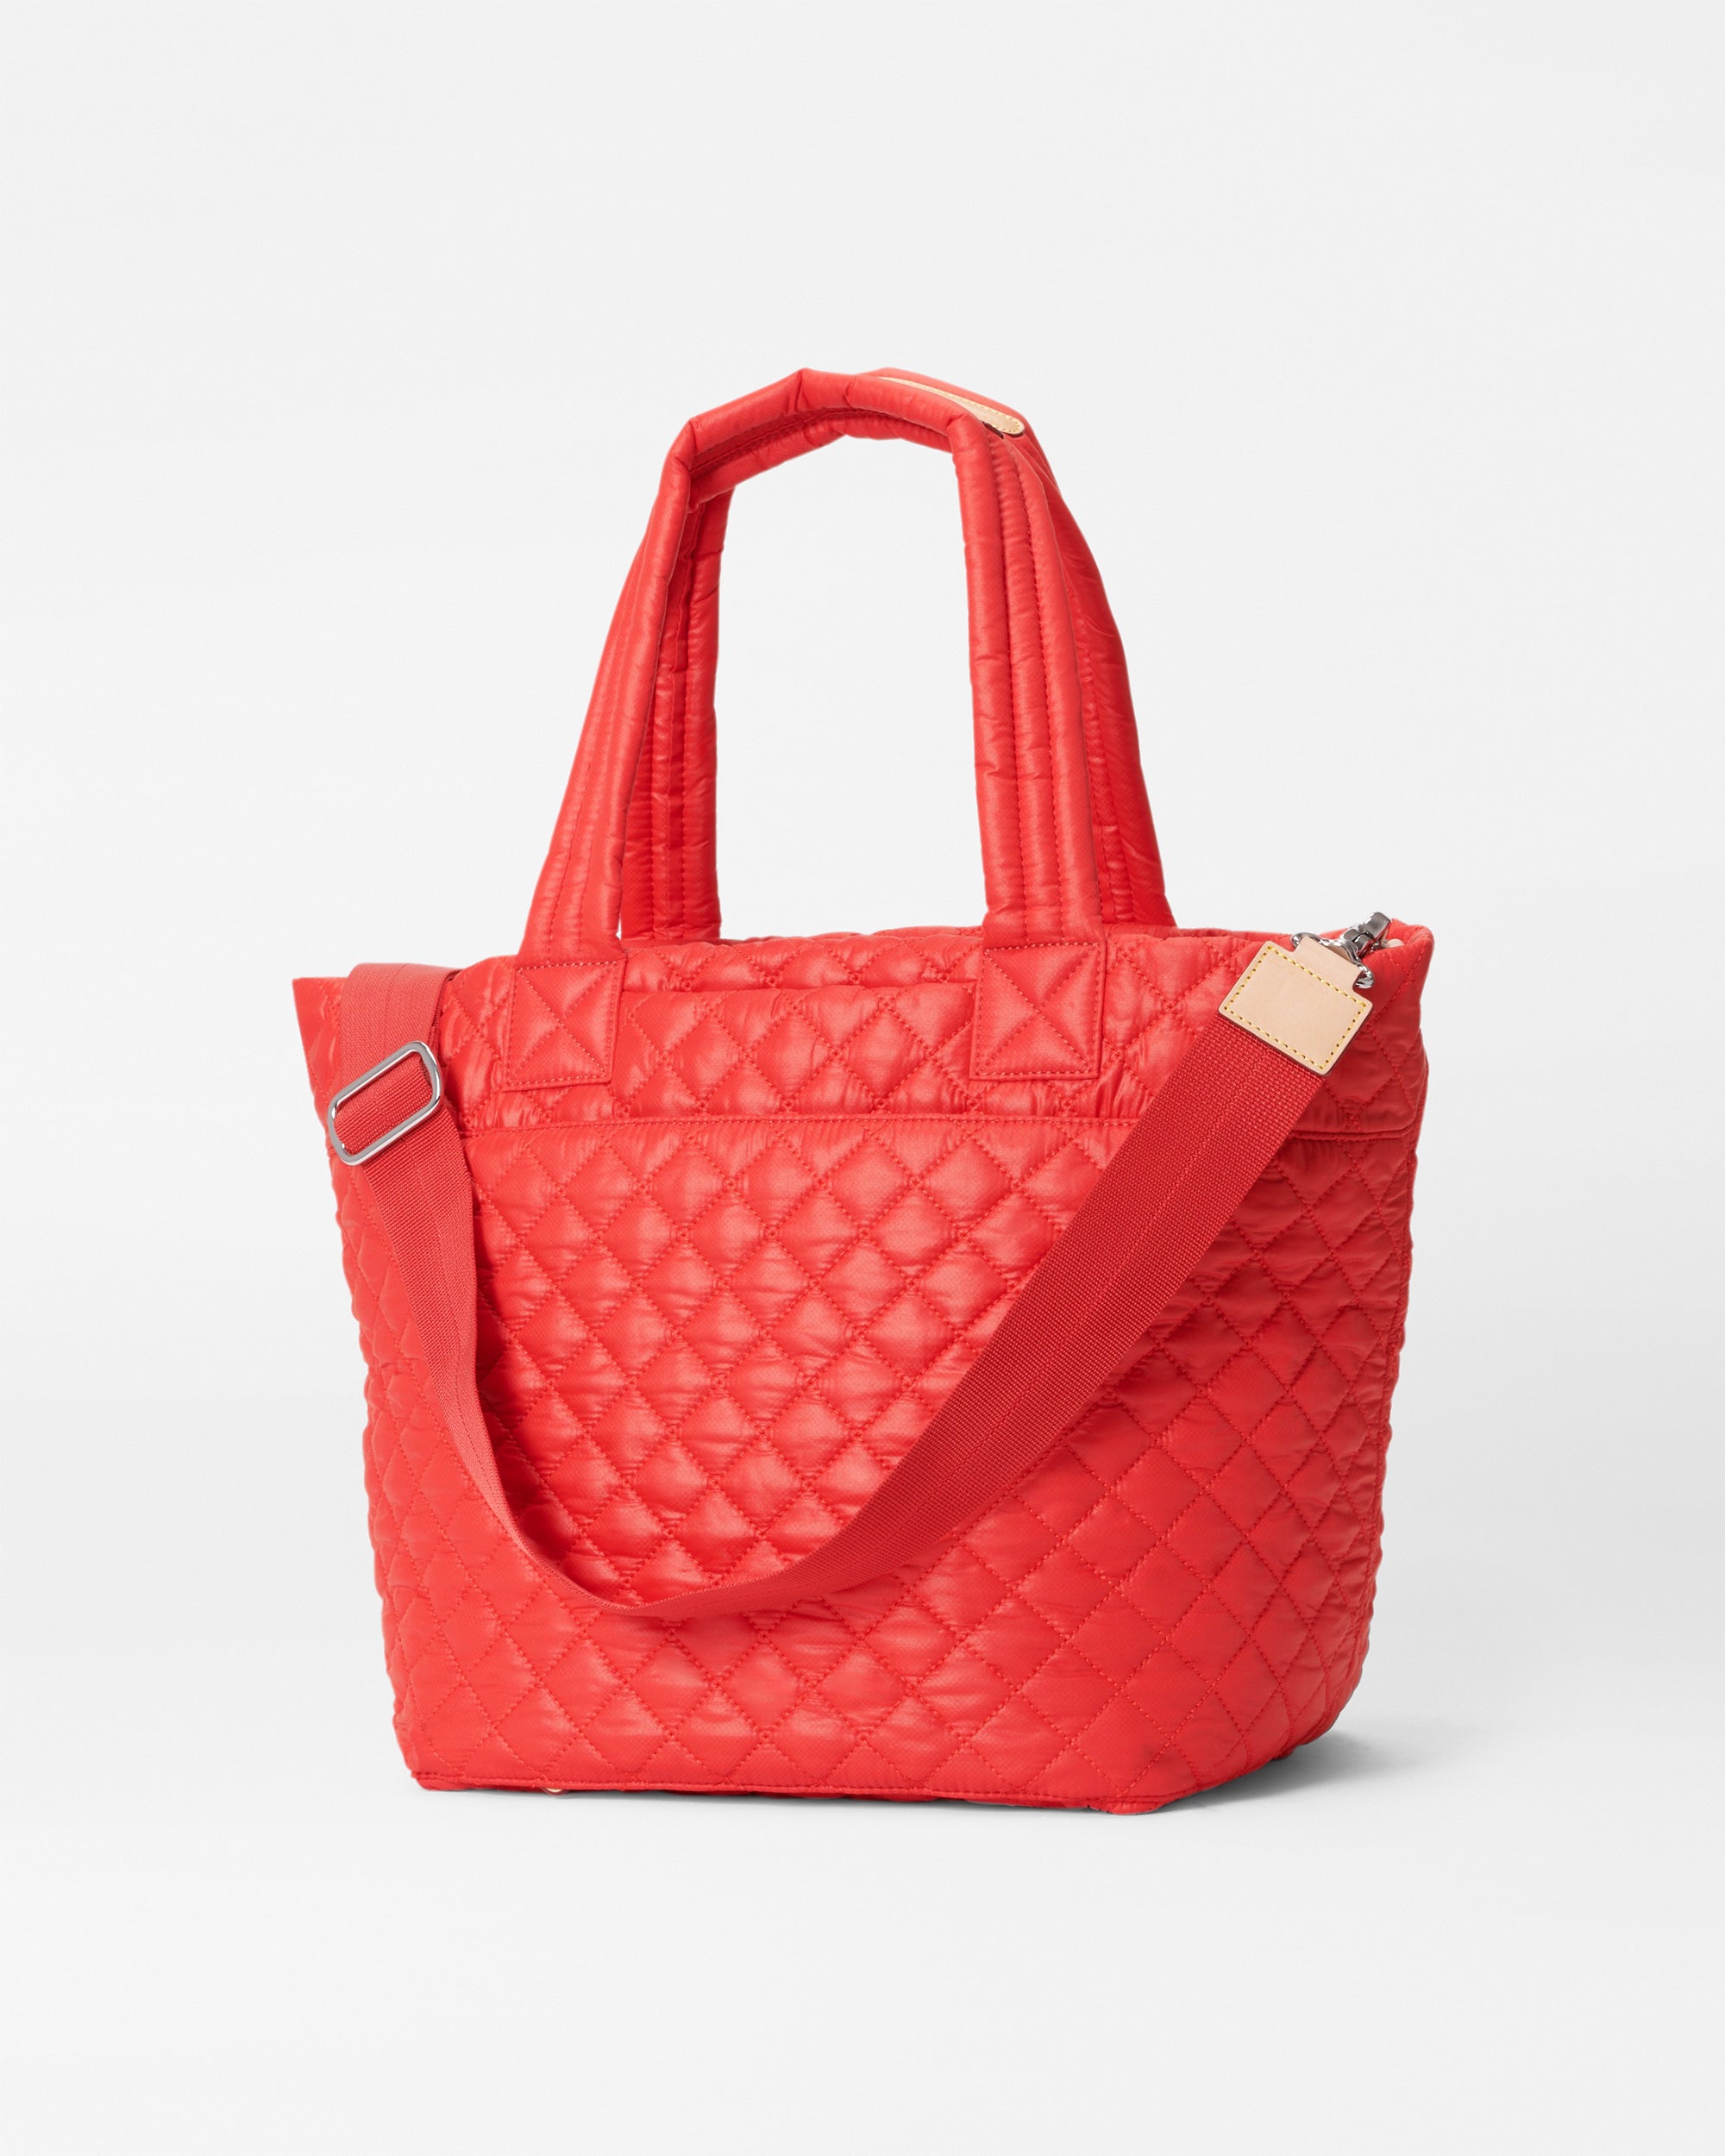 Metro Leather (Red)